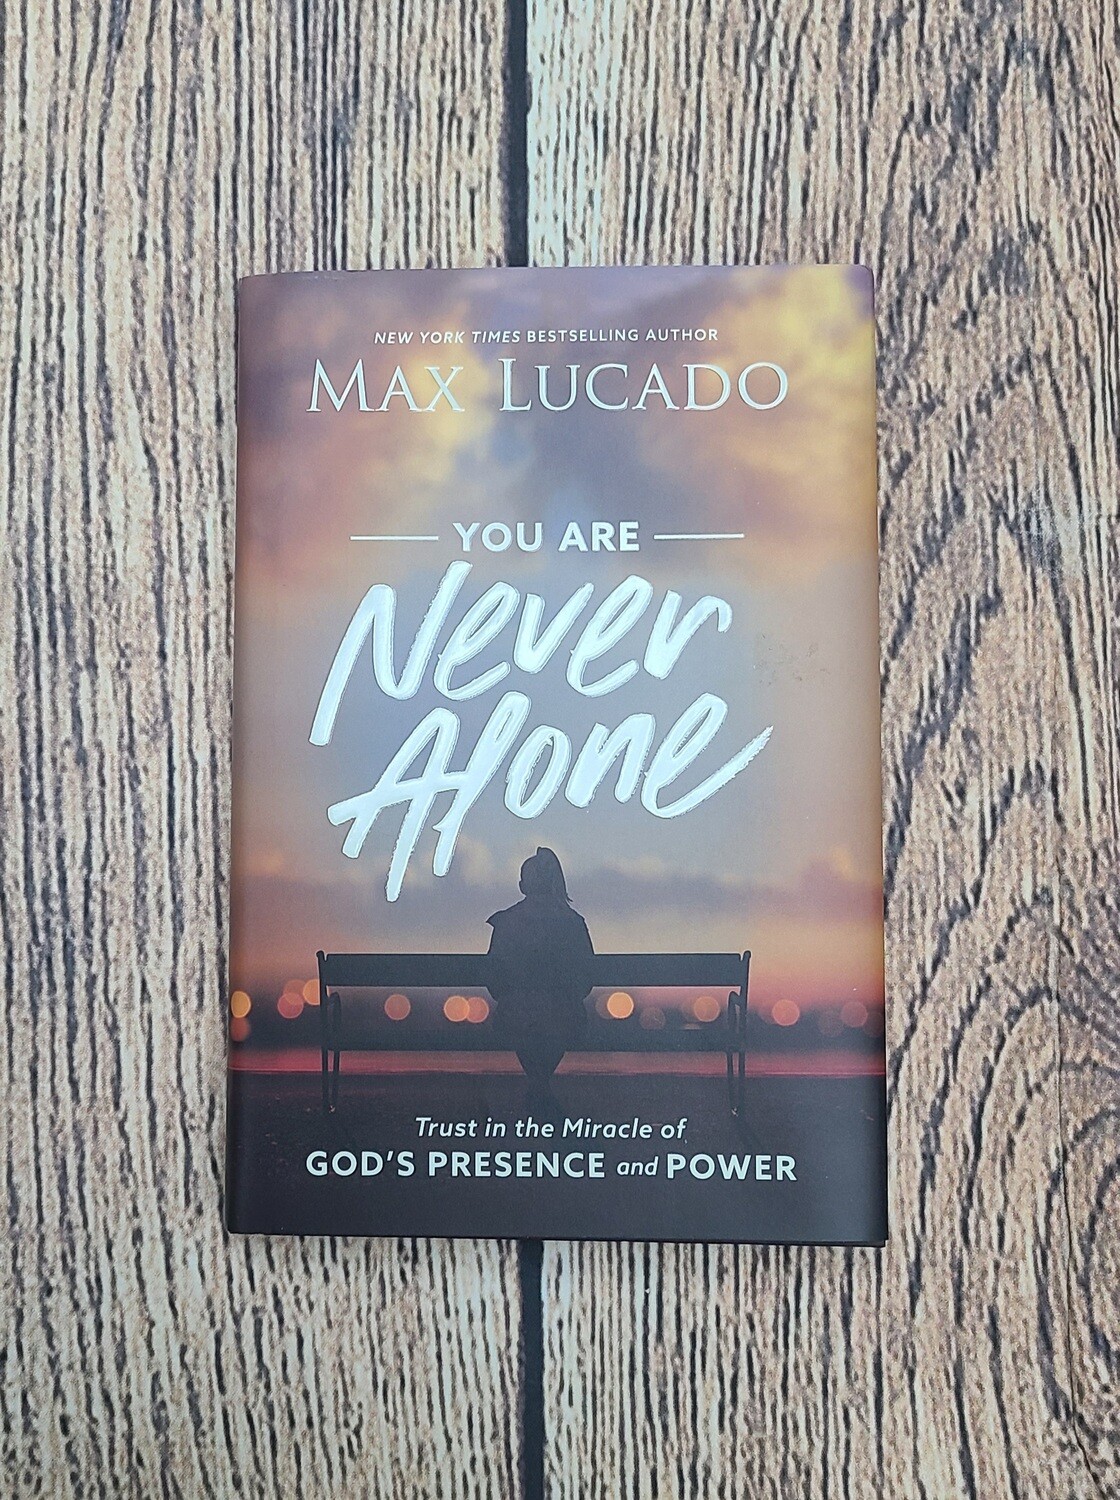 You are Never Alone by Max Lucado